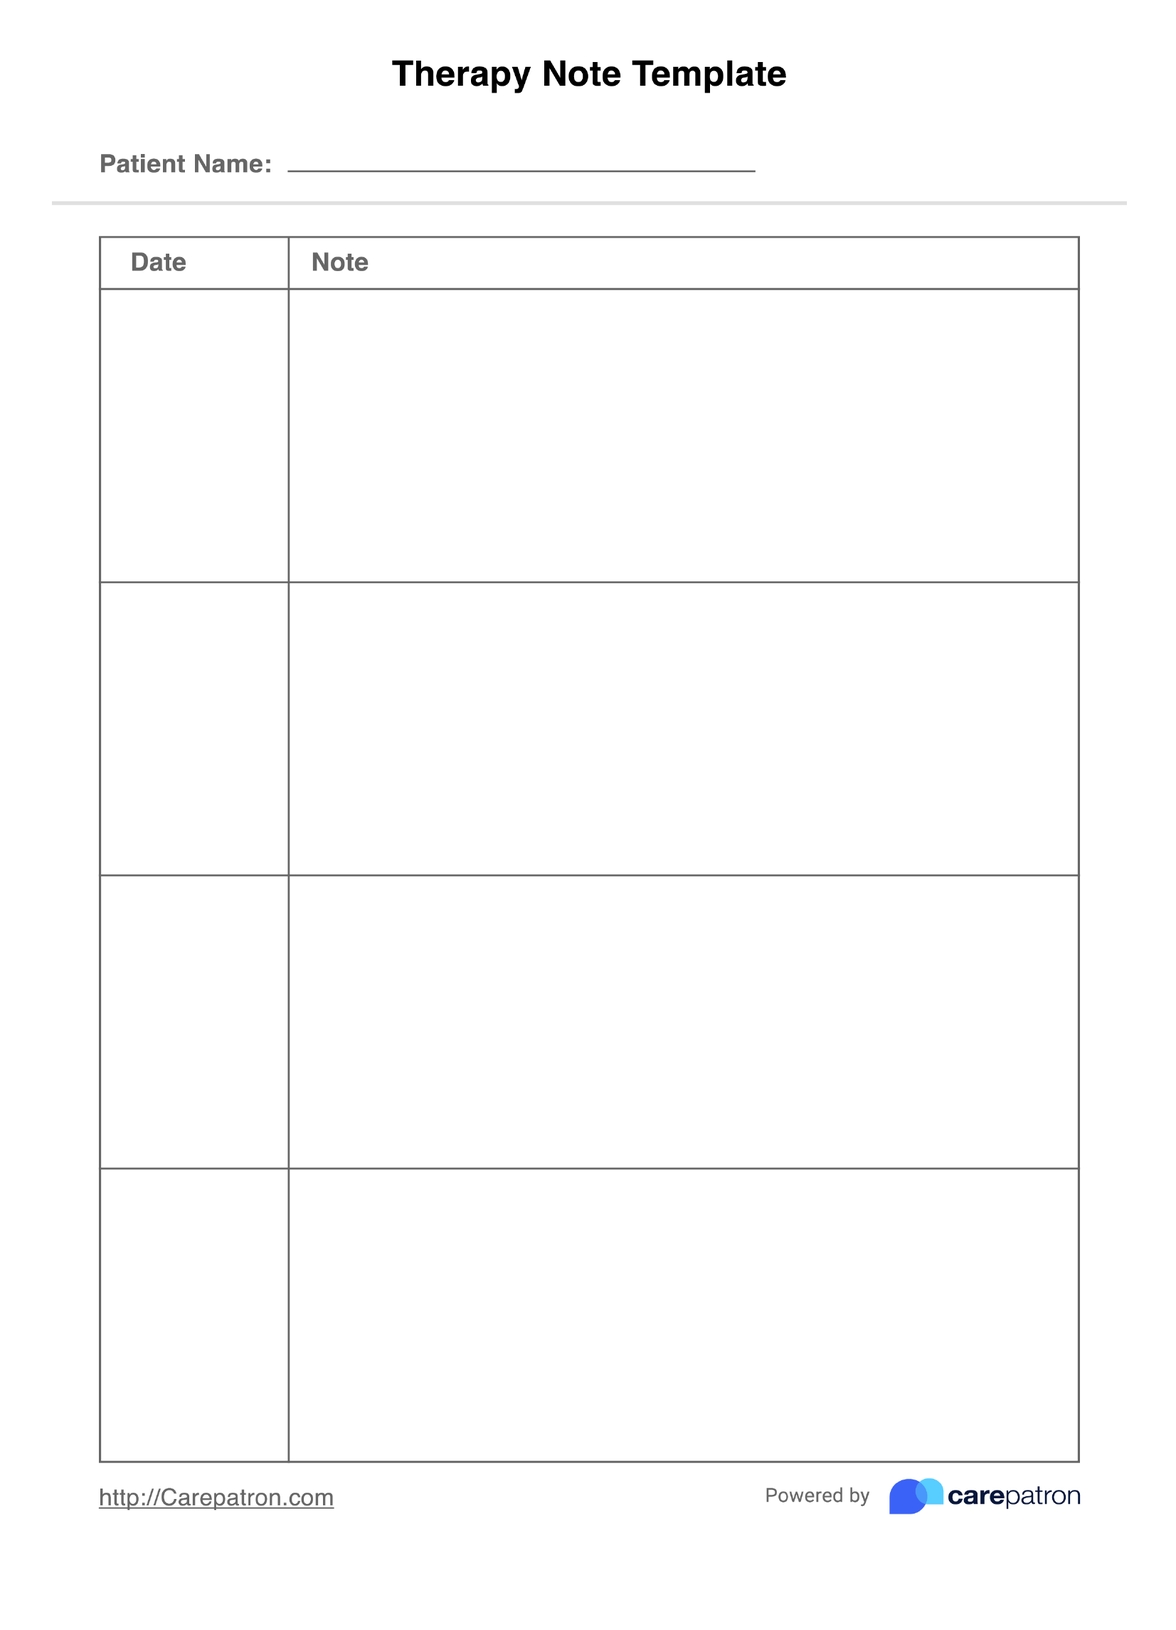 Therapy Notes Template PDF Example